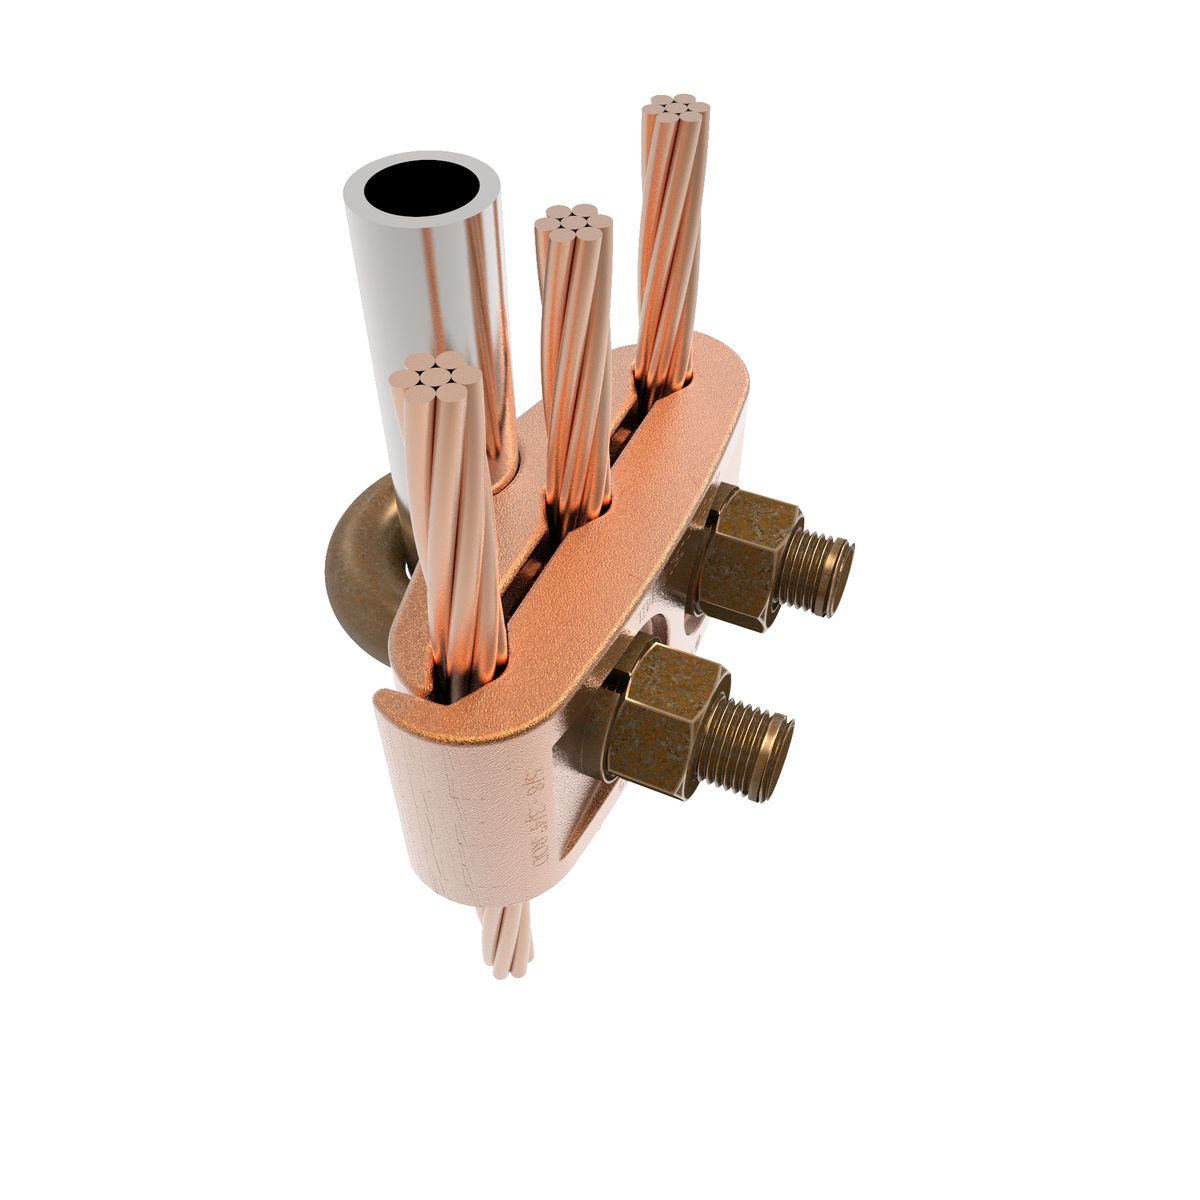 GK6426, Copper Alloy Grounding Clamp, 3 Cables to Rod or Pipe, GK6426